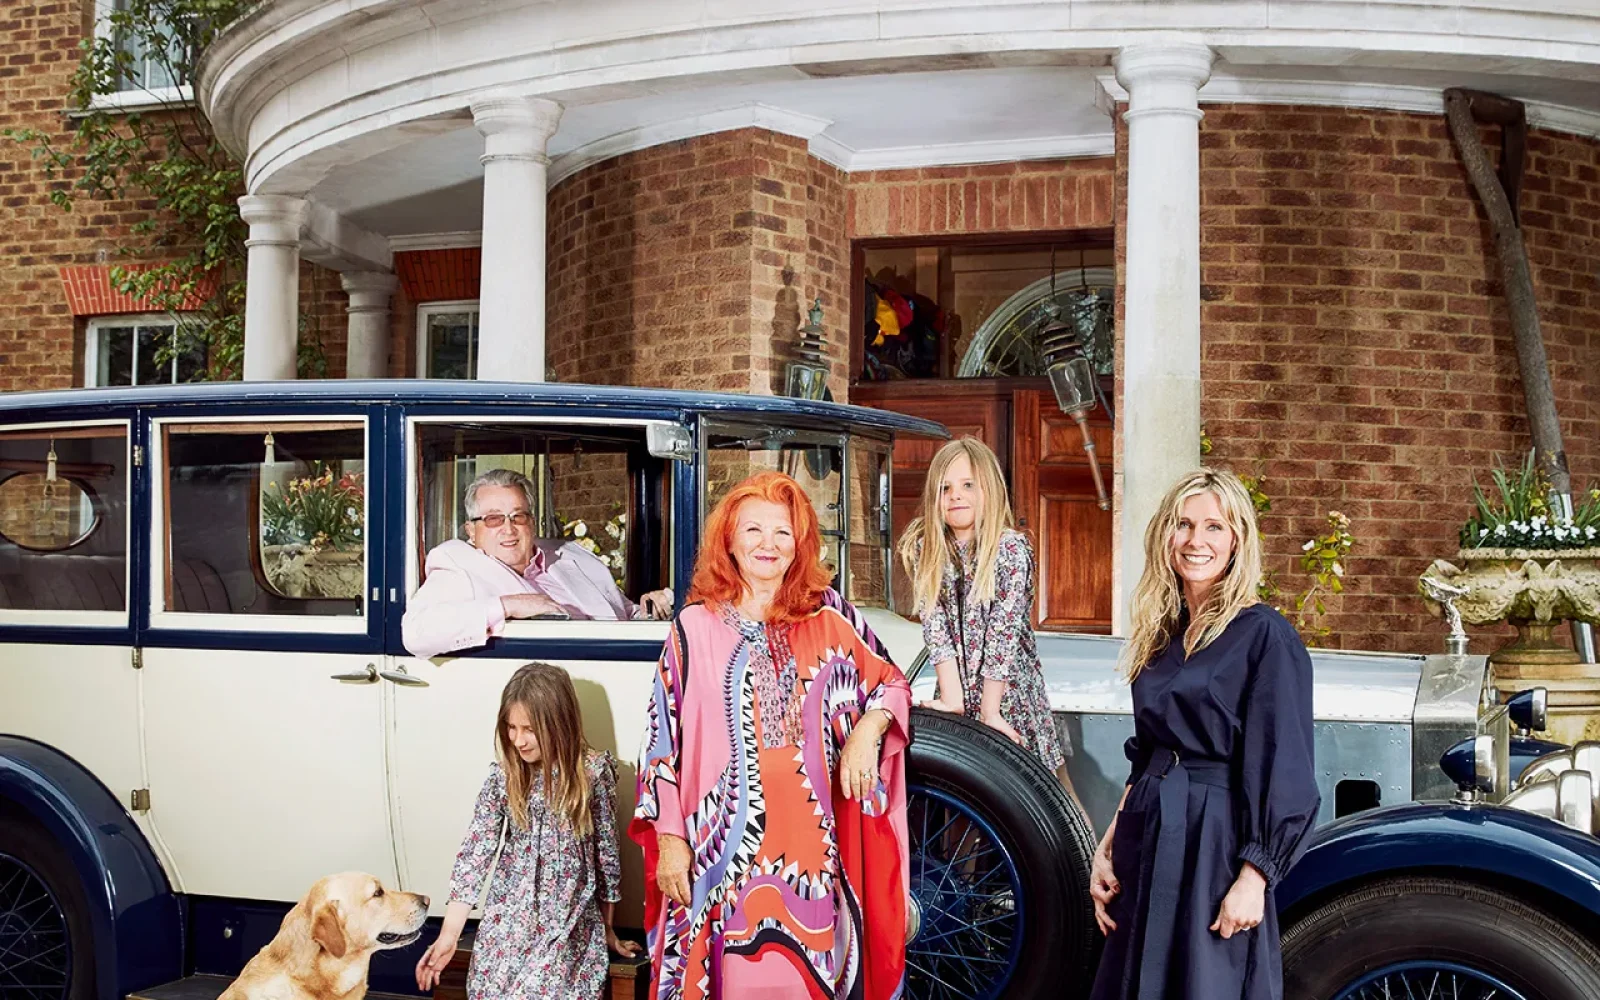 SIR WILLIAM (IN HIS VINTAGE ROLLS-ROYCE) AND LADY MCALPINE, WITH, FROM LEFT, HER GRANDDAUGHTERS MATILDA AND POPPY AND HER DAUGHTER VICKY PLUS BORIS THE LABRADOR AND PUGS ALICE AND ALGIE. Mark Cocksedge